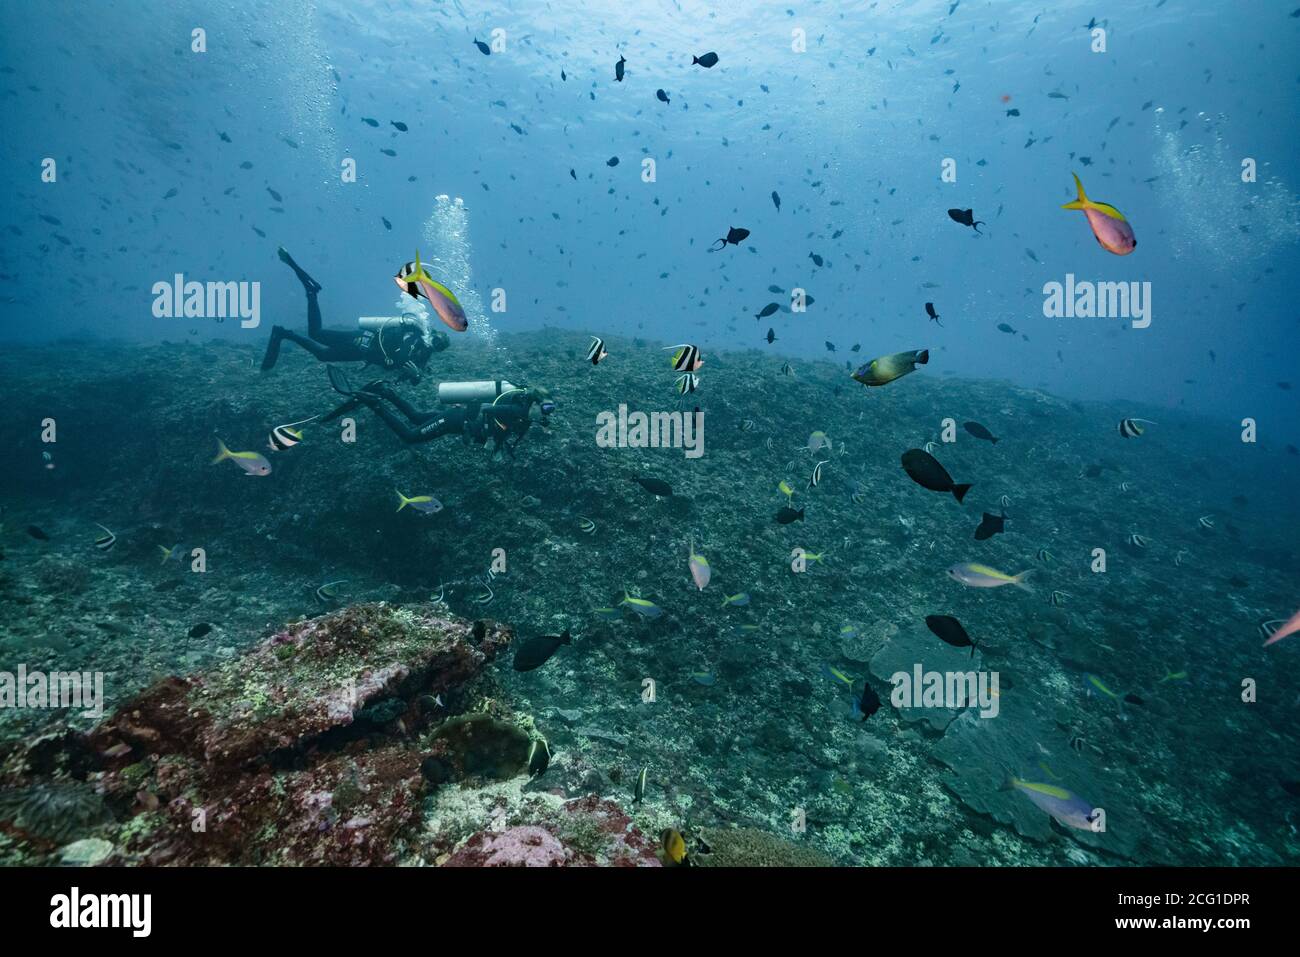 Scuba divers swim through a group of various fish on a coral reef Stock Photo